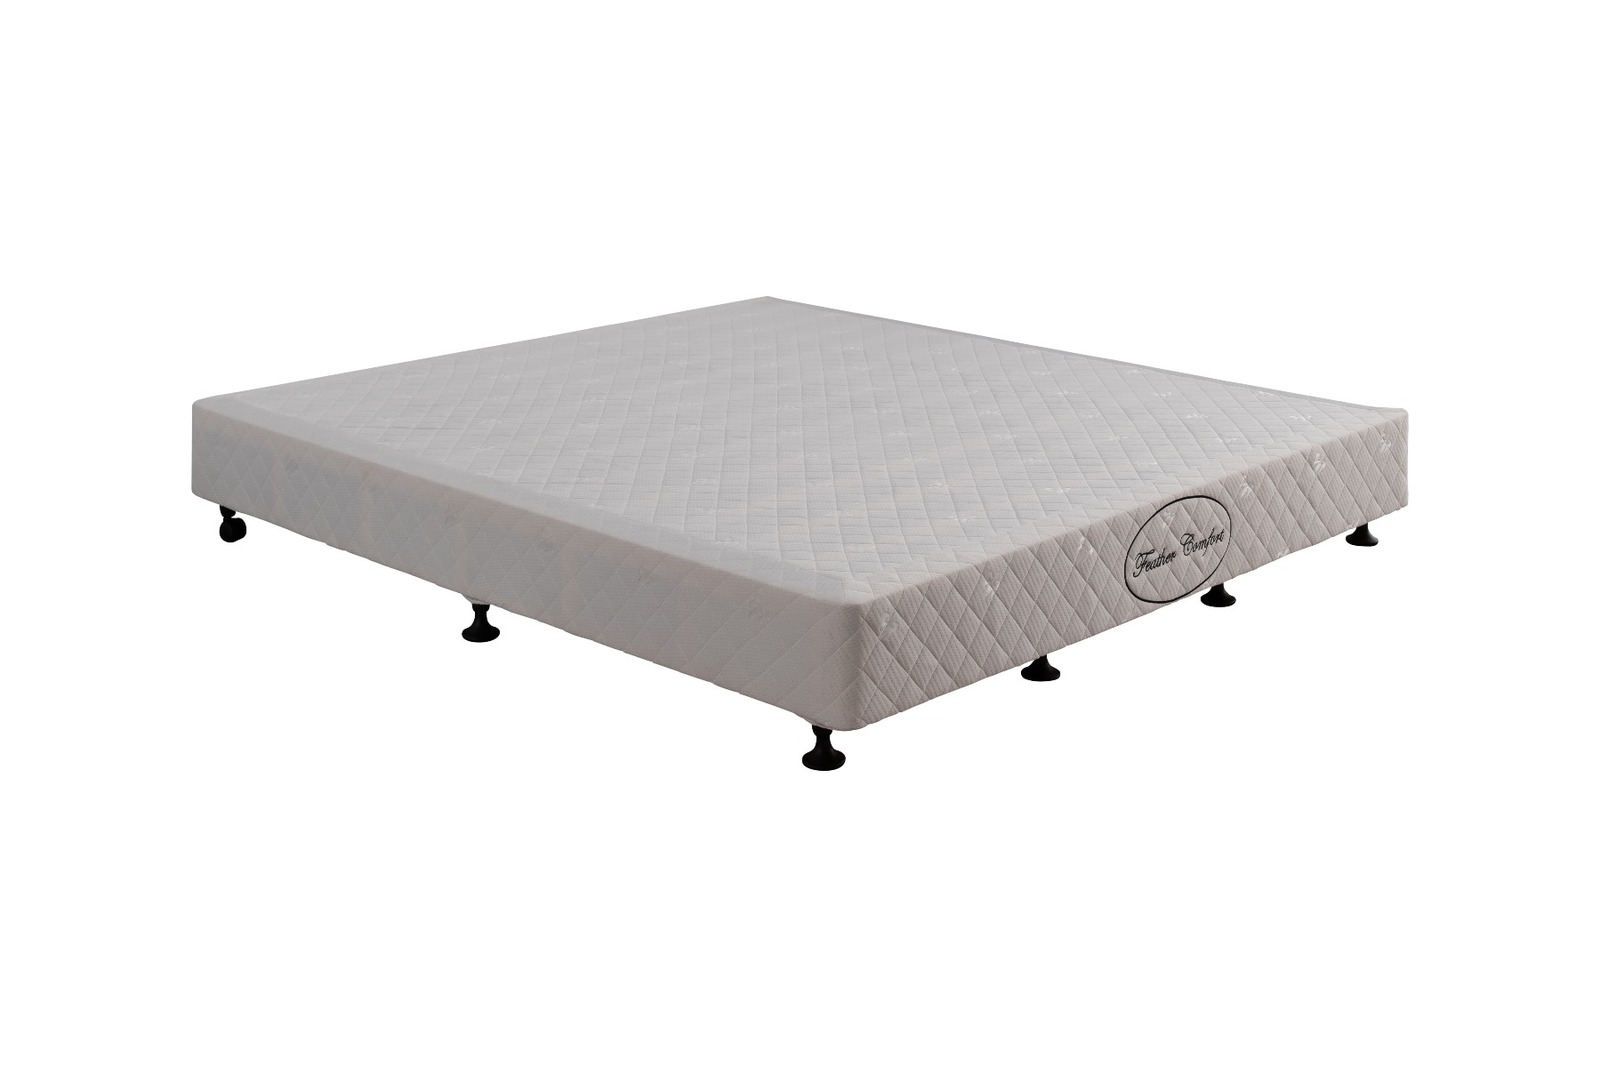 spring mattress base with legs queen size